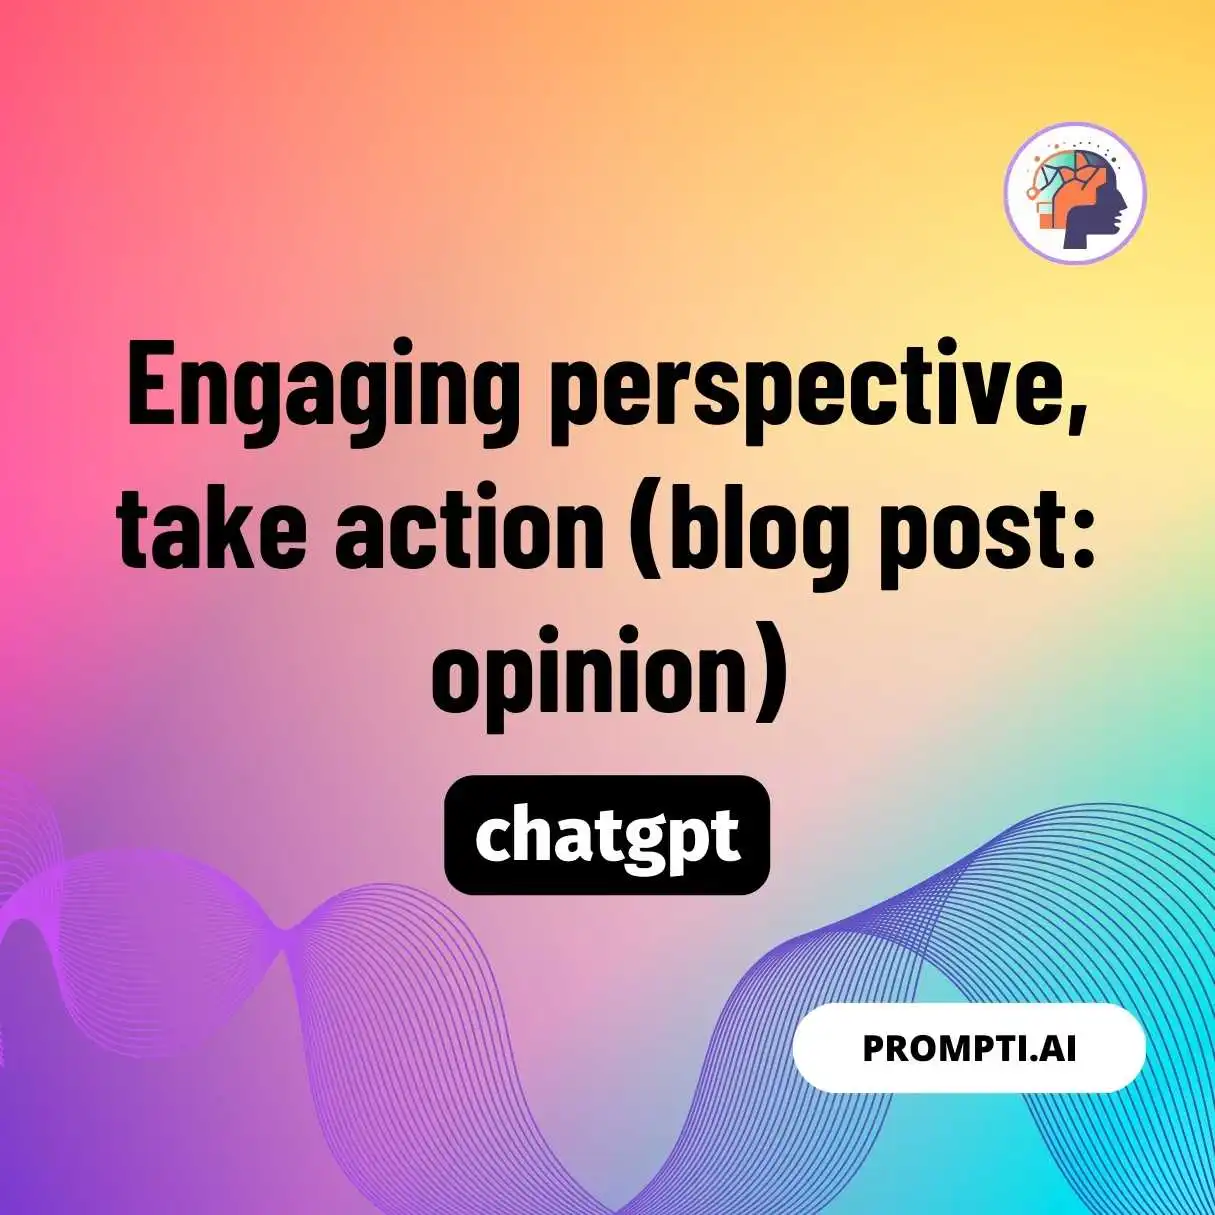 Engaging perspective, take action (blog post: opinion)